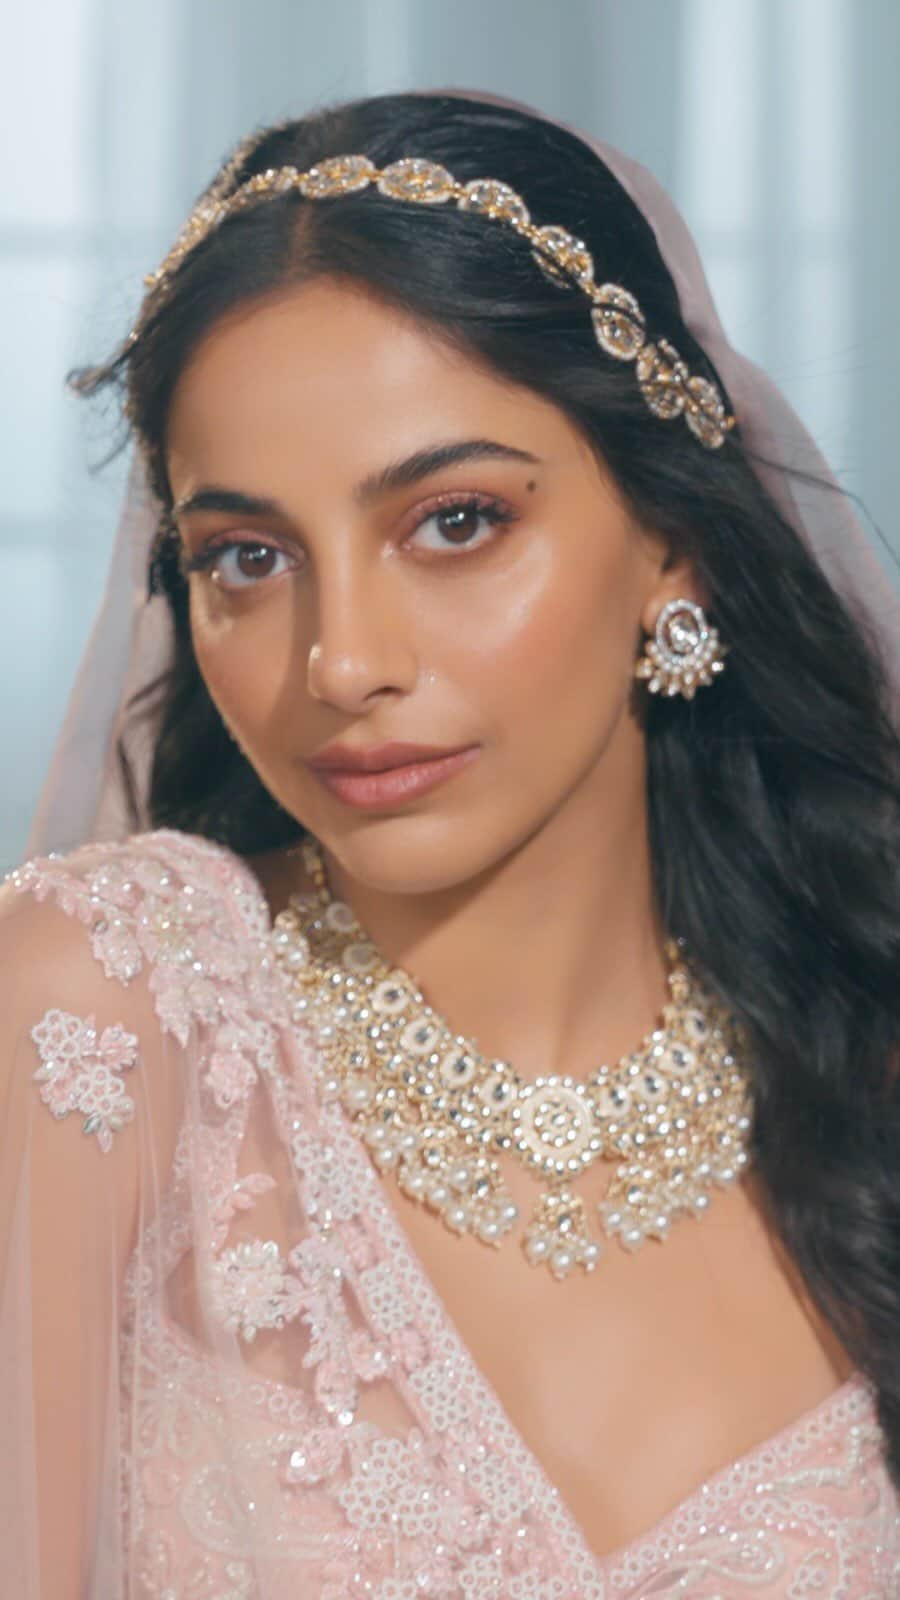 Banita Sandhuのインスタグラム：「Bringing you 3 ICONIC Wedding Looks by @charlottetilbury featuring the GORGEOUS @banitasandhu that are sure to dominate the wedding season! 🤩  Behind the MAGIC? Celebrity makeup artist @tanvichemburkar 🪄  To all you brides to-be, we can’t wait to see you recreate these STUNNING looks! 🫶🏻  ✨ Dreamy Pillow Talk Wedding Look ✨ Enchanting Wedding Look ✨ Golden Goddess Wedding Look   #Nykaa #CharlotteTilburyXNykaa #OnlyAtNykaa #BridalLook #BridalMakeup #WeddingMakeup」